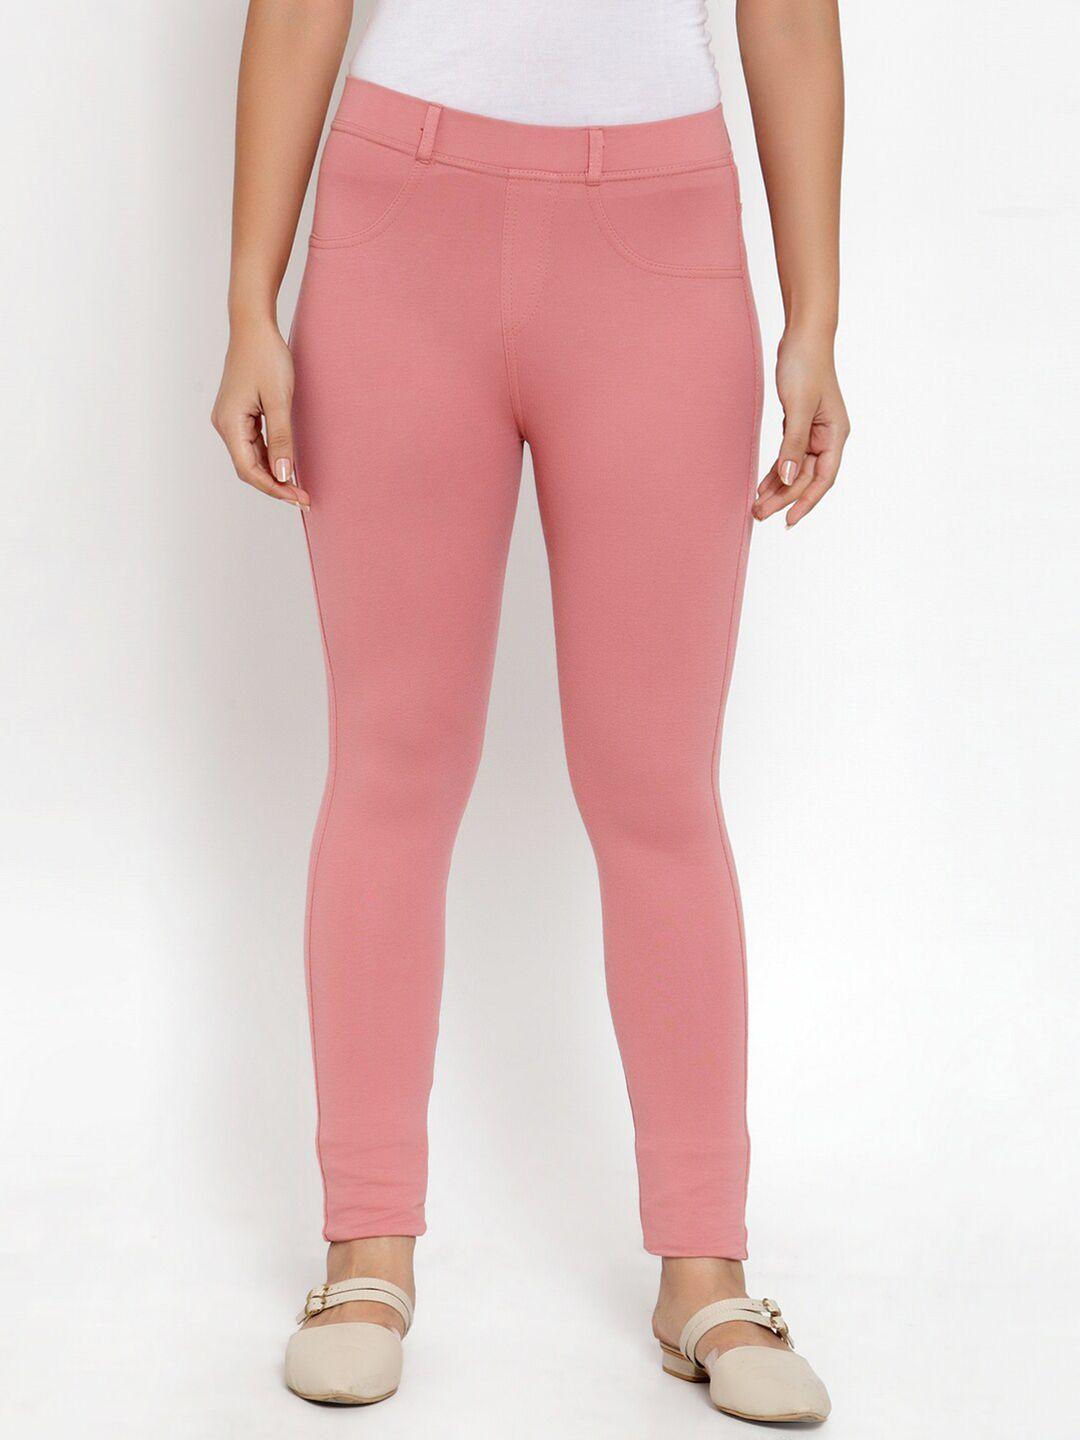 klotthe women peach colored solid skinny-fit jeggings